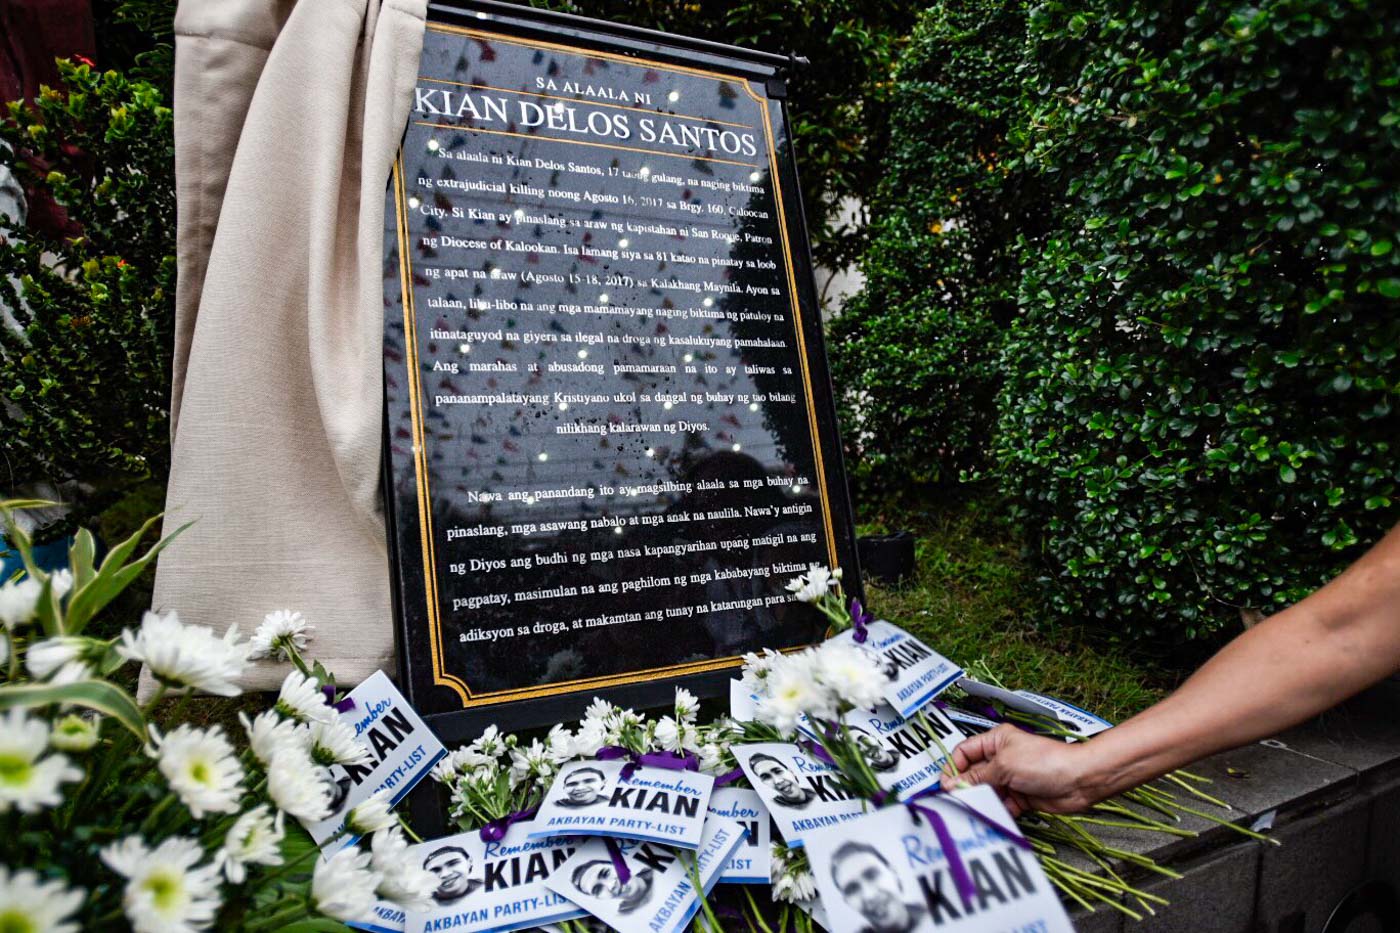 JUSTICE. A commemorative marker is unveiled on the death anniversary of Kian delos Santos. Photo by Maria Tan/Rappler 